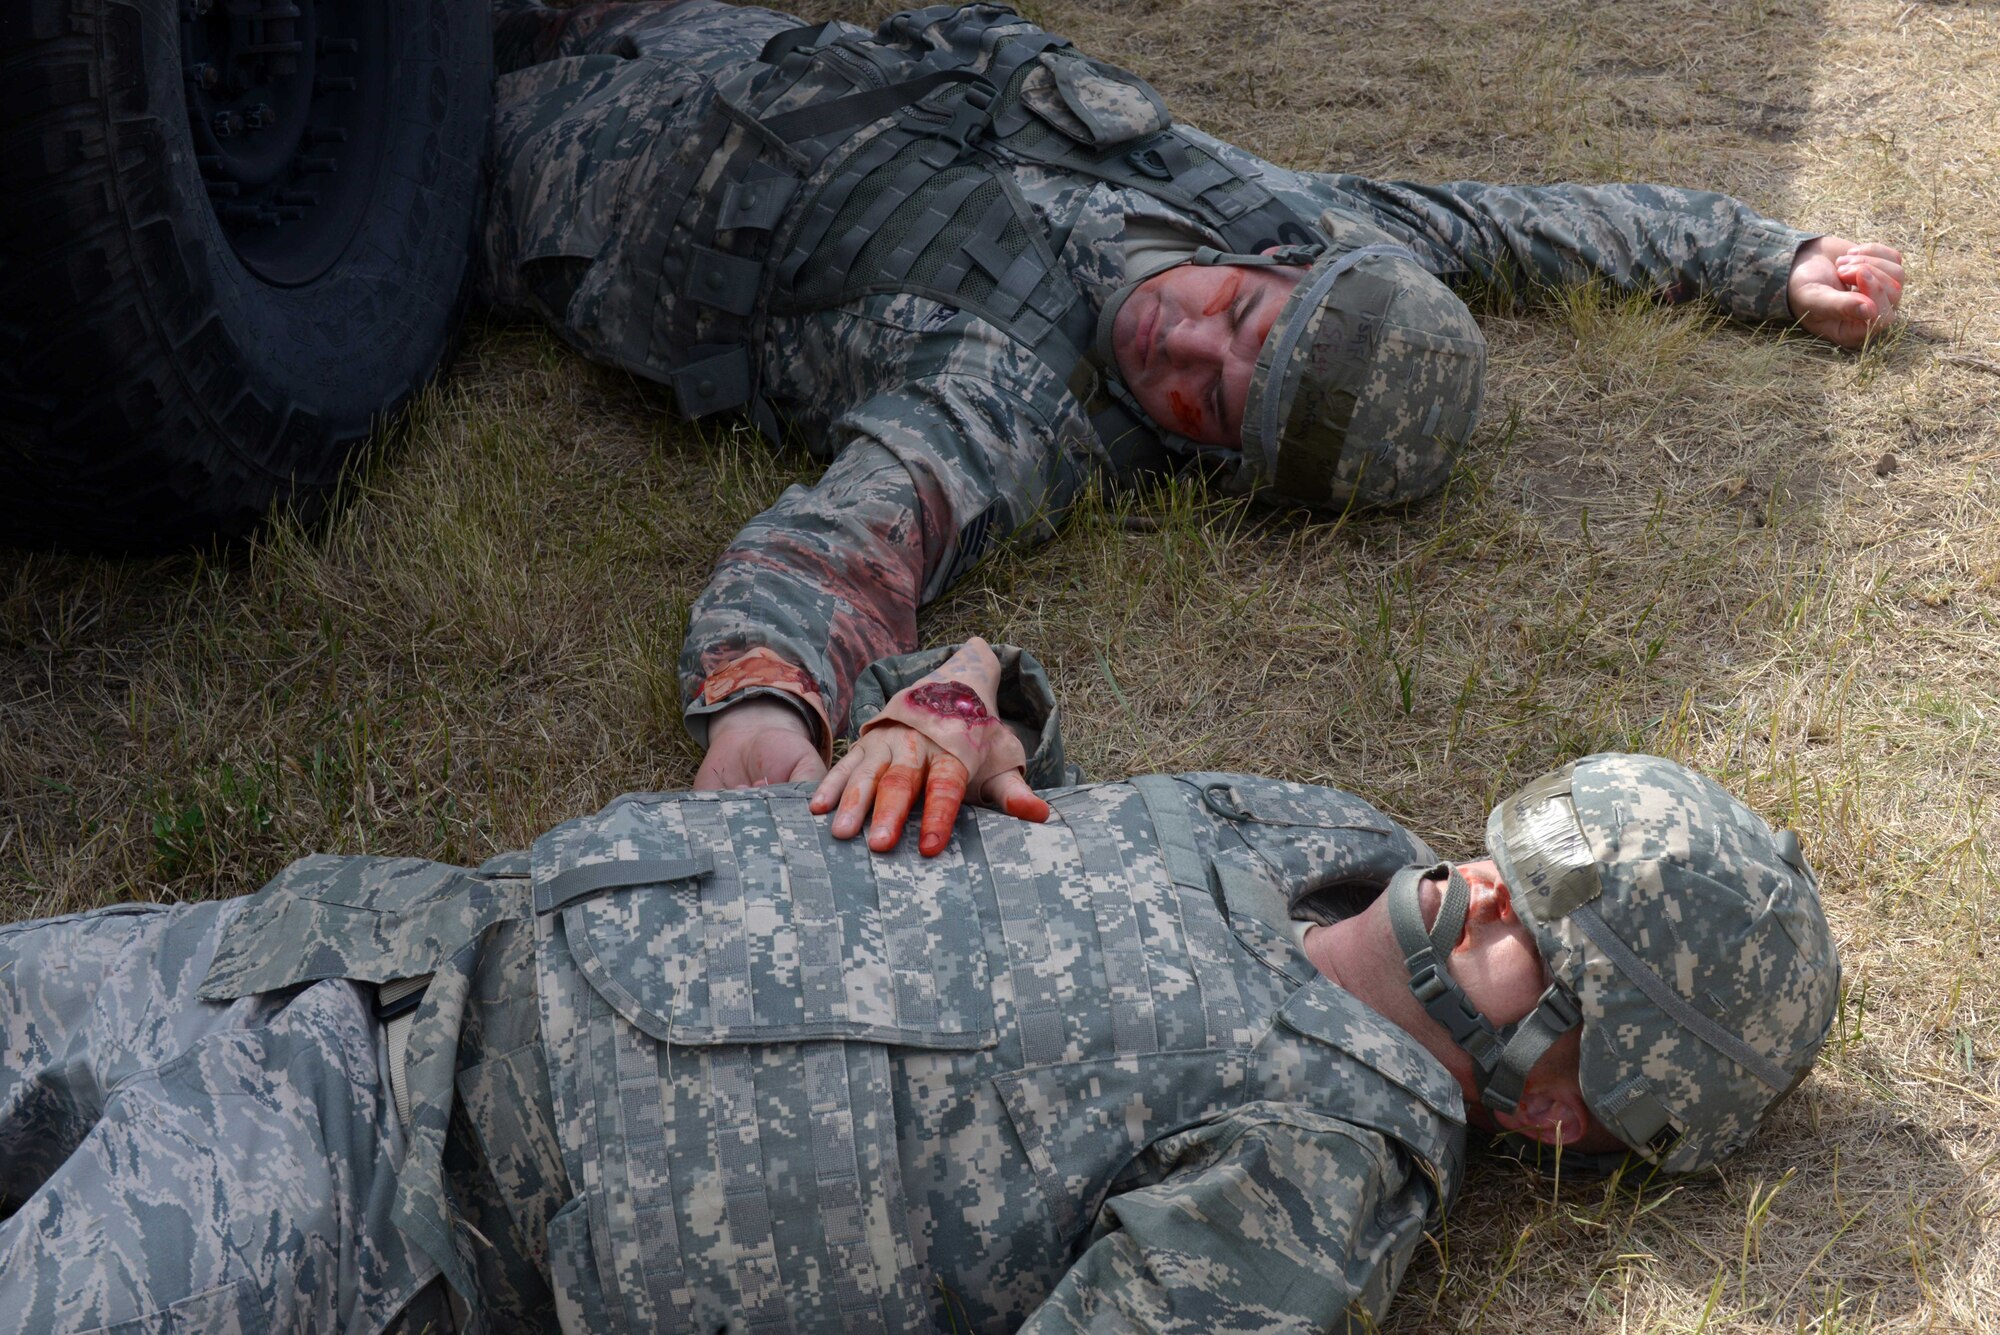 The 28th Civil Engineer Squadron Airmen volunteer as casualties at the Self Aid Buddy Care (SABC) station during the Prime Base Engineer Emergency Force (BEEF) challenge at Ellsworth Air Force Base, S.D., July 22, 2016. Prime BEEF teams consist of 28th Civil Engineer Squadron personnel who are organized, equipped and trained to respond within hours to worldwide emergencies and to support the Air Force's mission with base build-up, sustainment and recovery operations. (U.S. Air Force photo by Airman Donald Knechtel) 